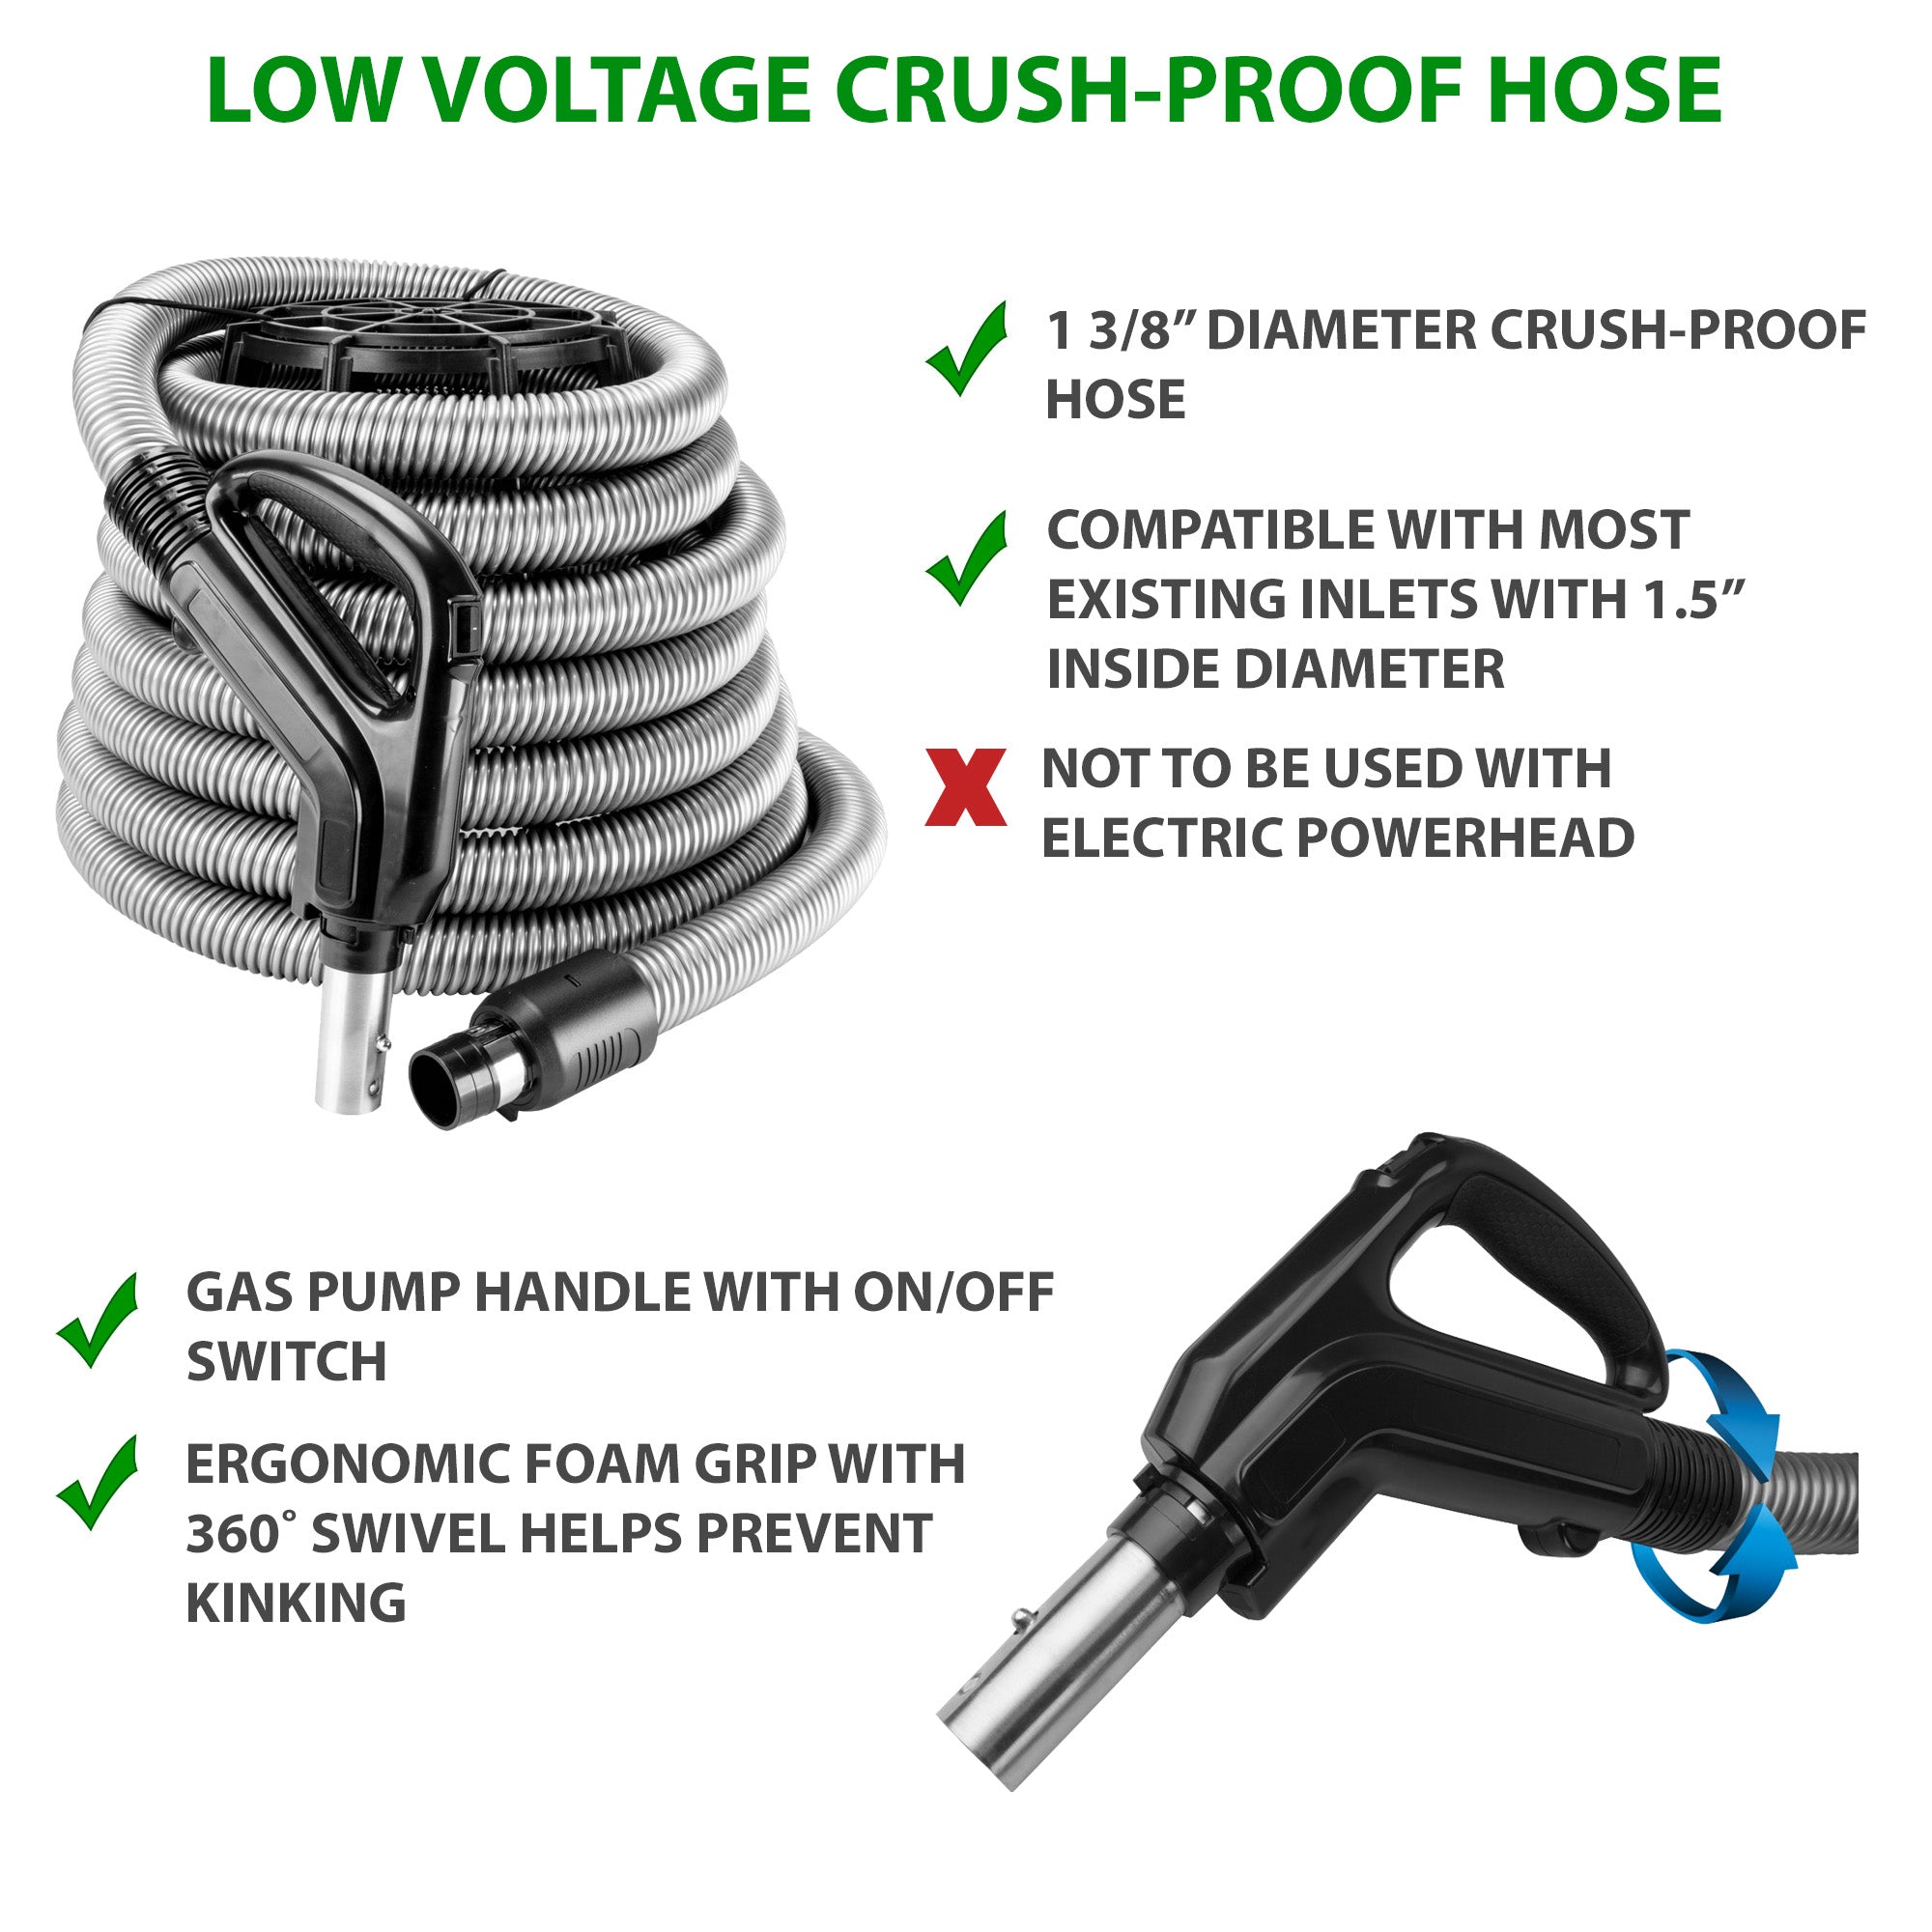 Low Voltage Crush-Proof Hose with Gas Pump handle with 360 degree swivel